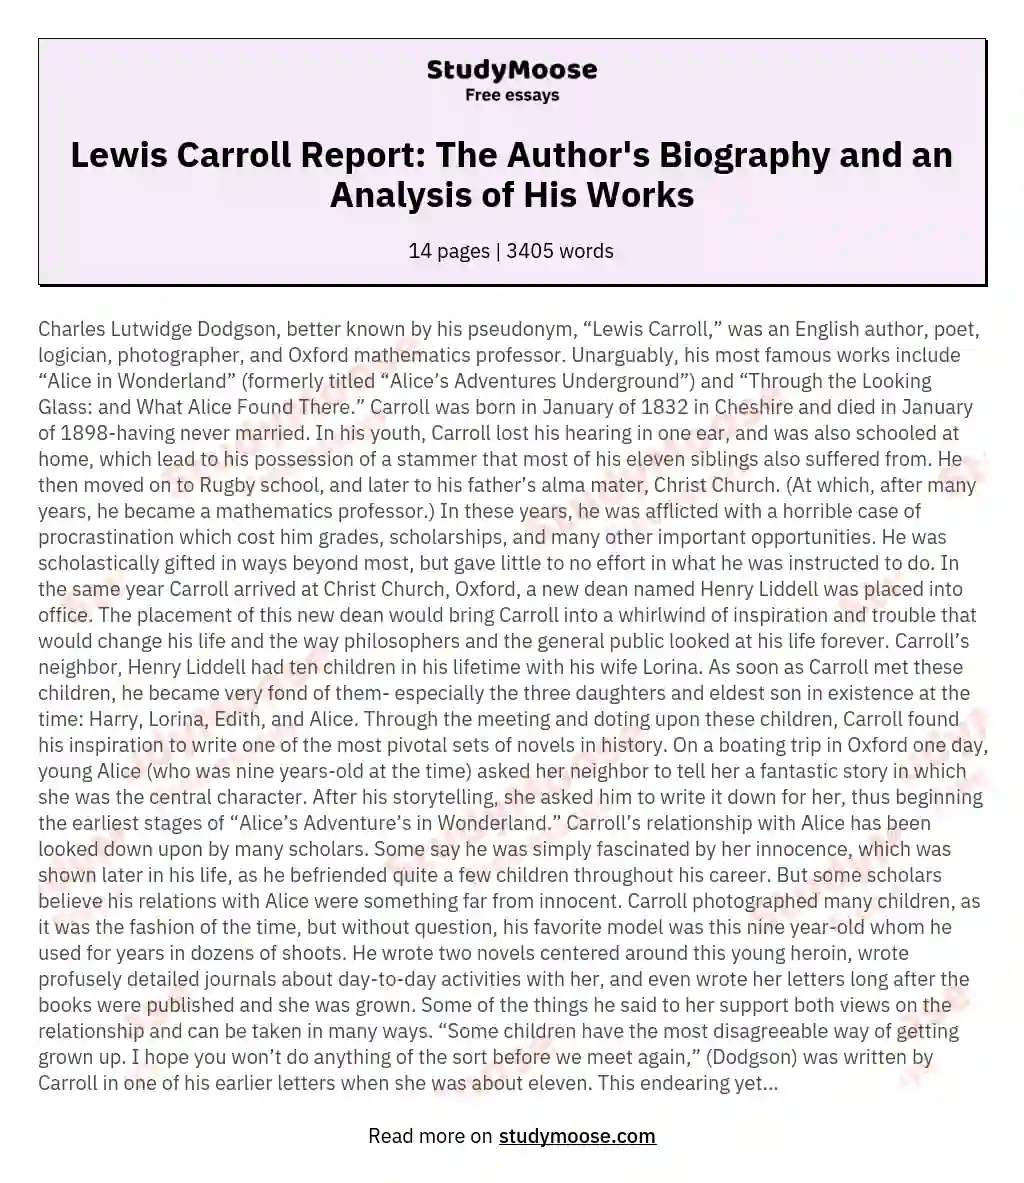 Lewis Carroll Report: The Author's Biography and an Analysis of His Works essay